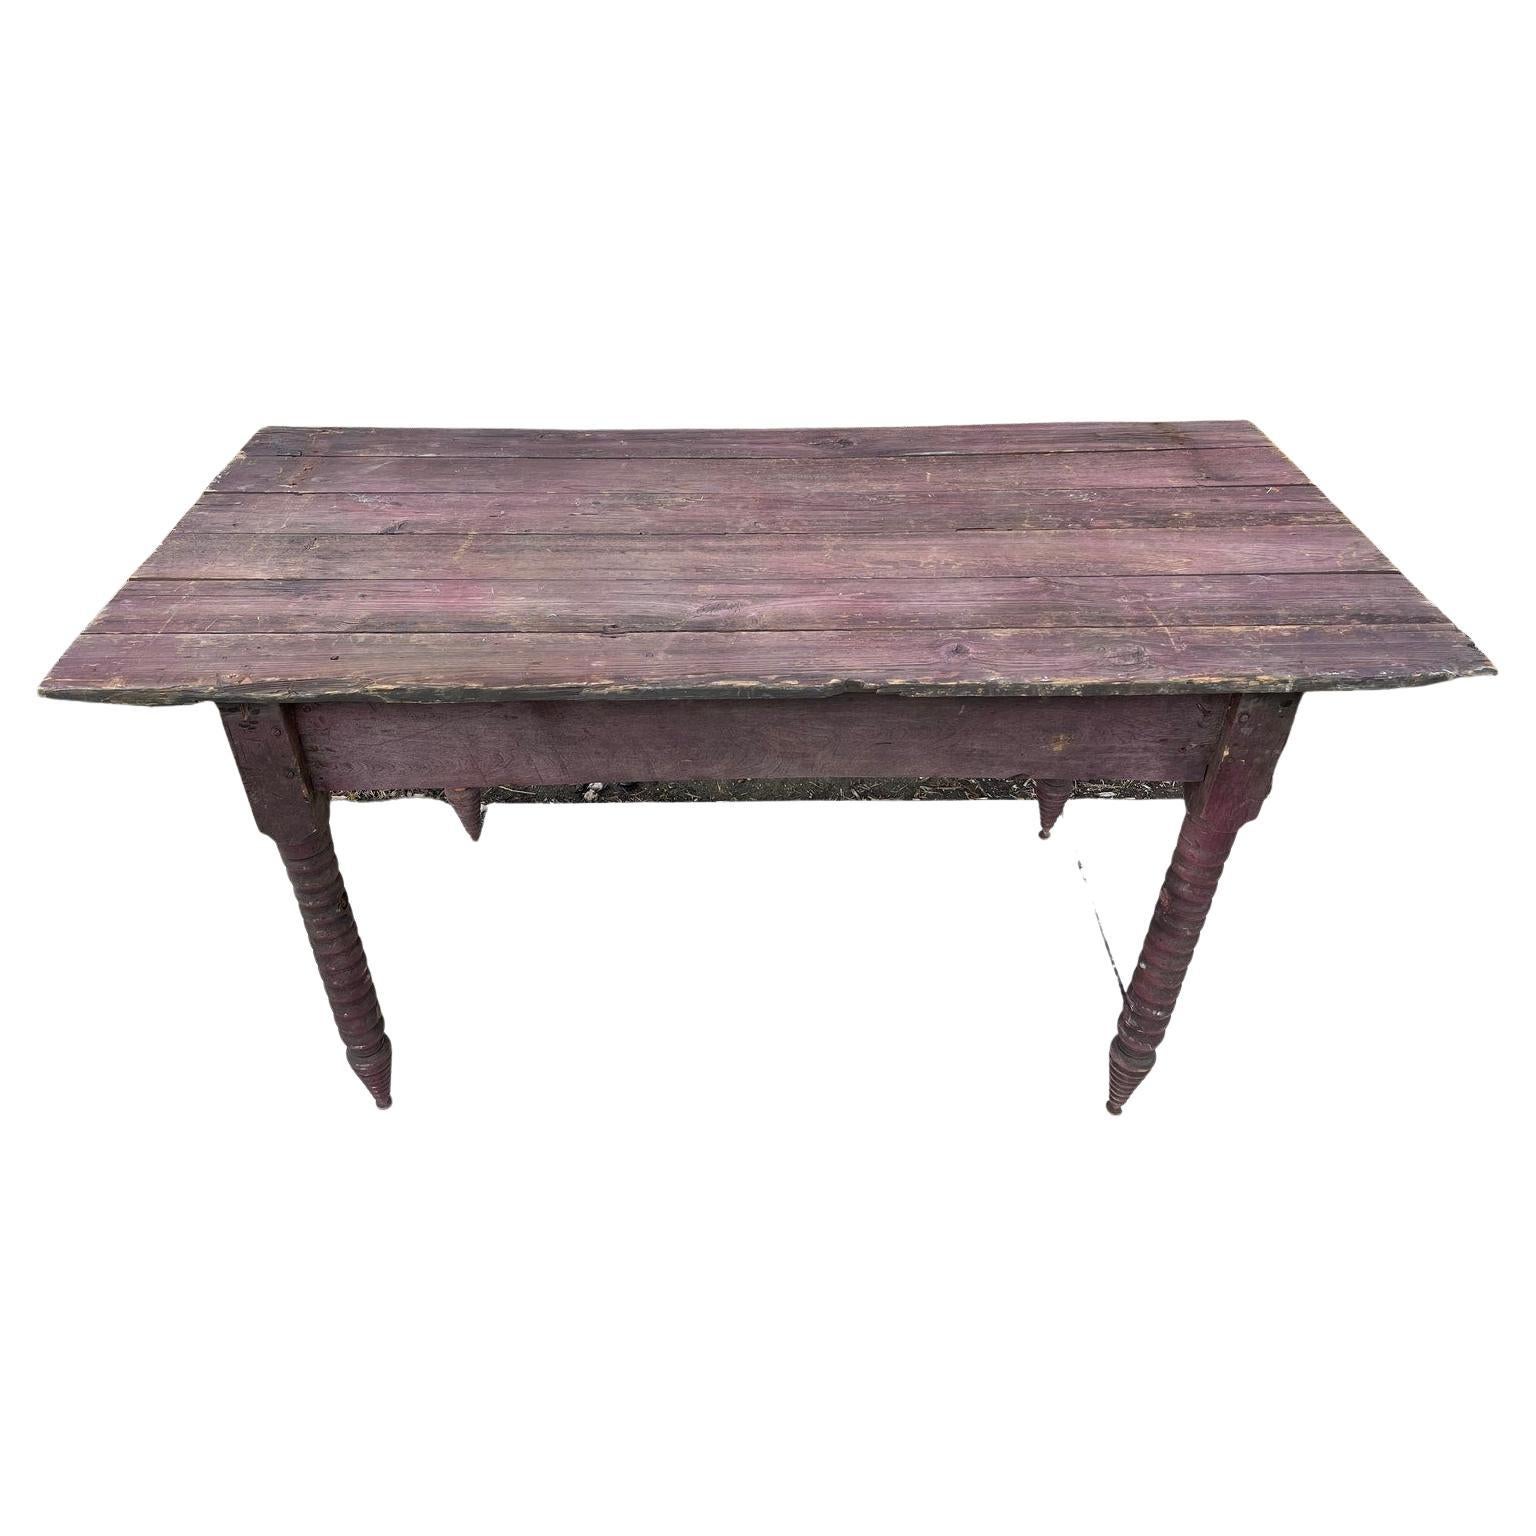 Rustic Antique American Farmhouse Weathered Work Table